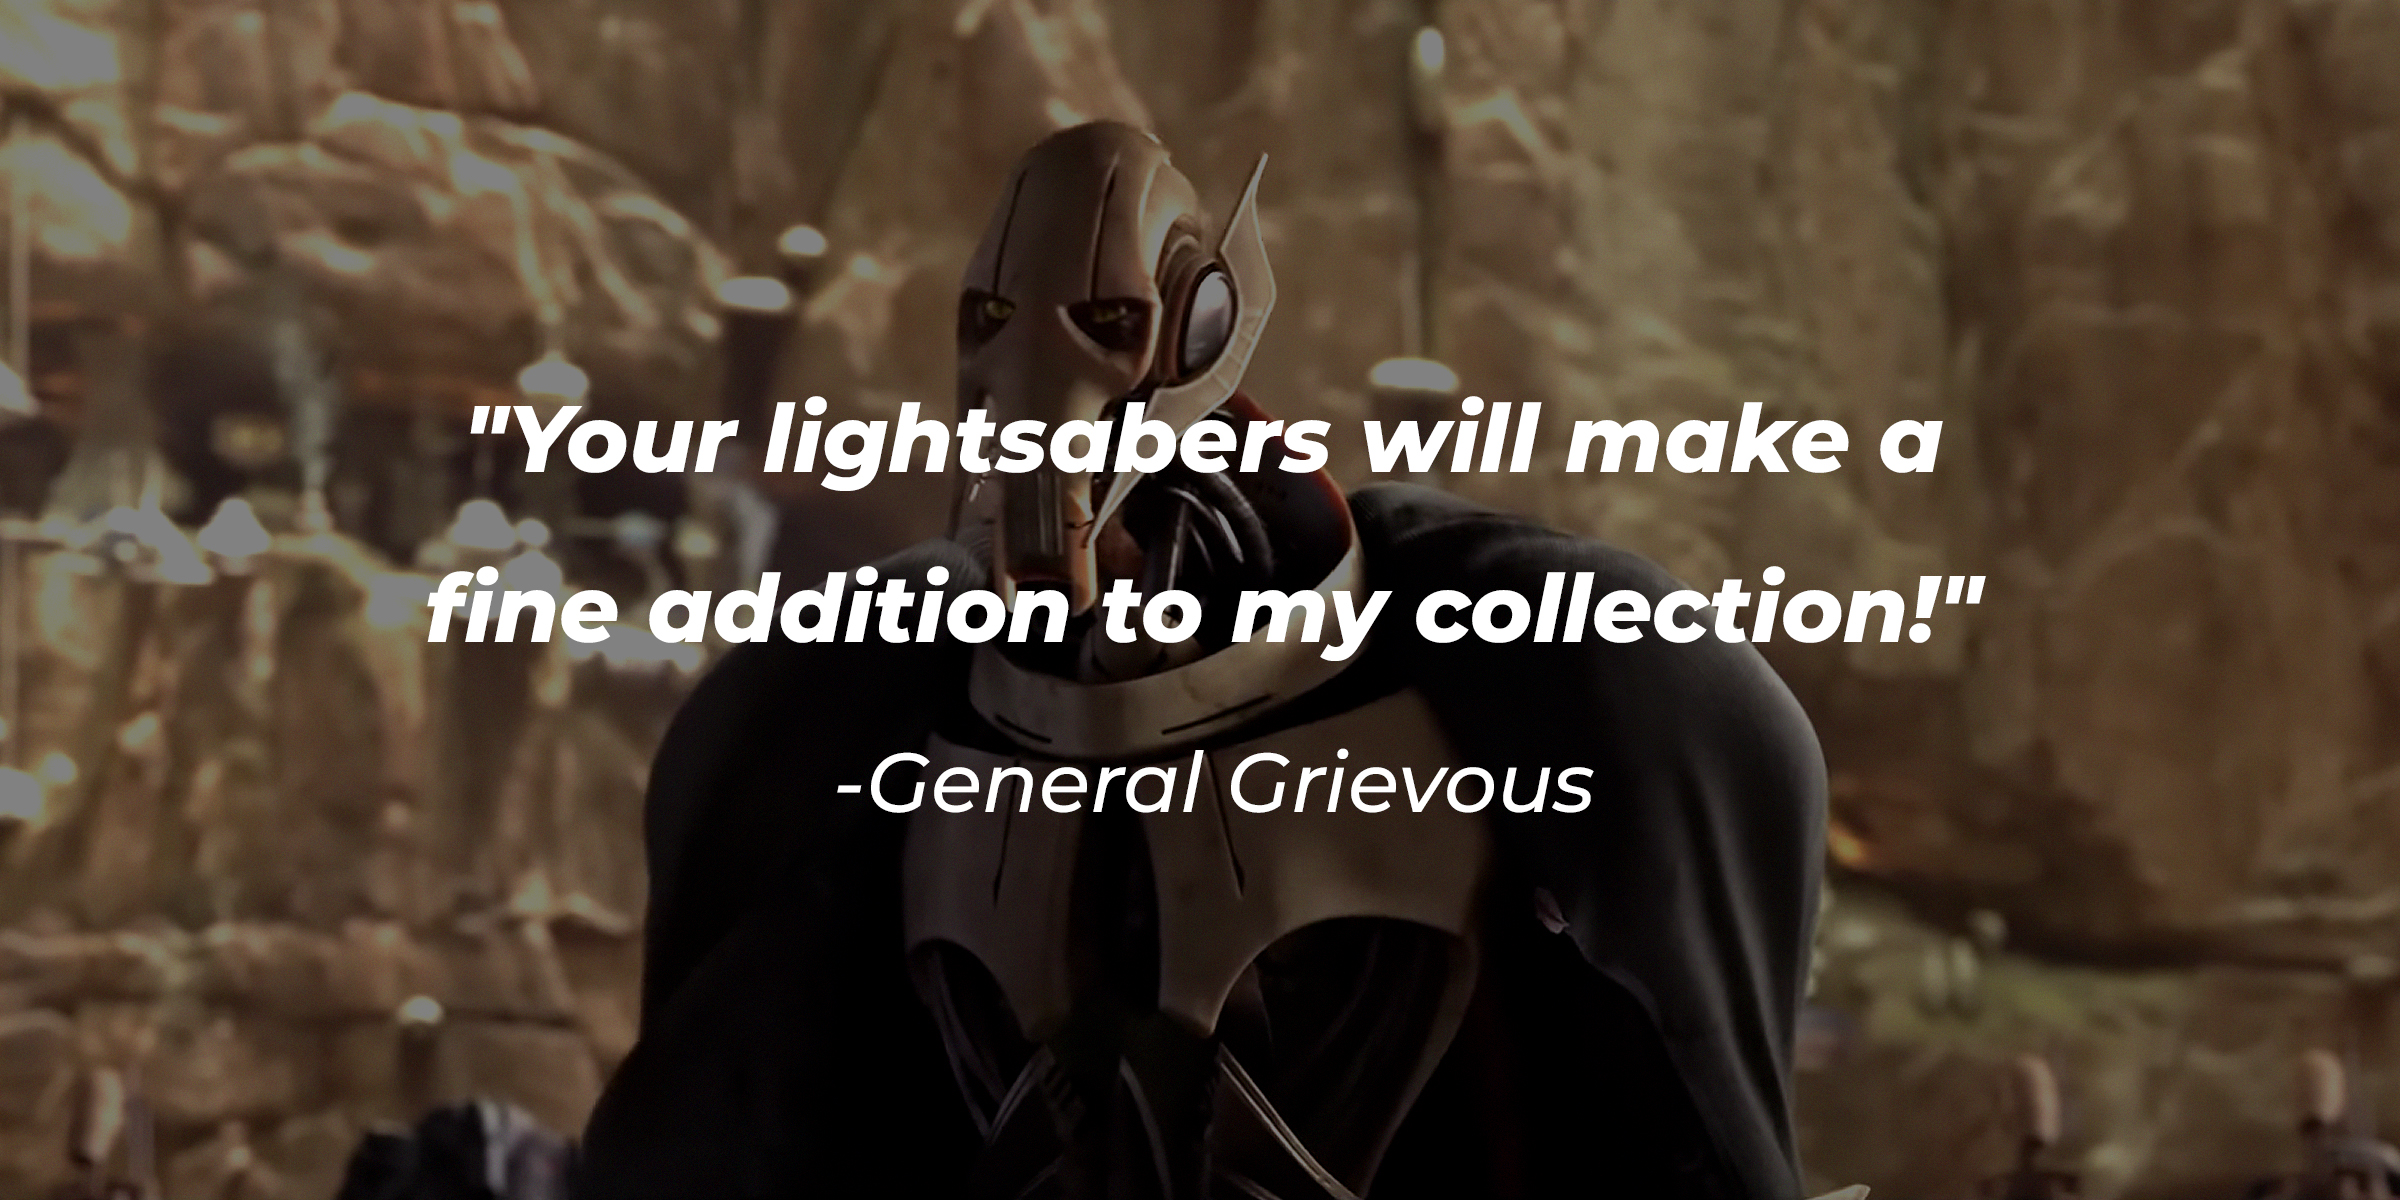 An image of General Grievous with his quote: "Your lightsabers will make a fine addition to my collection!" | Source: facebook.com/StarWars